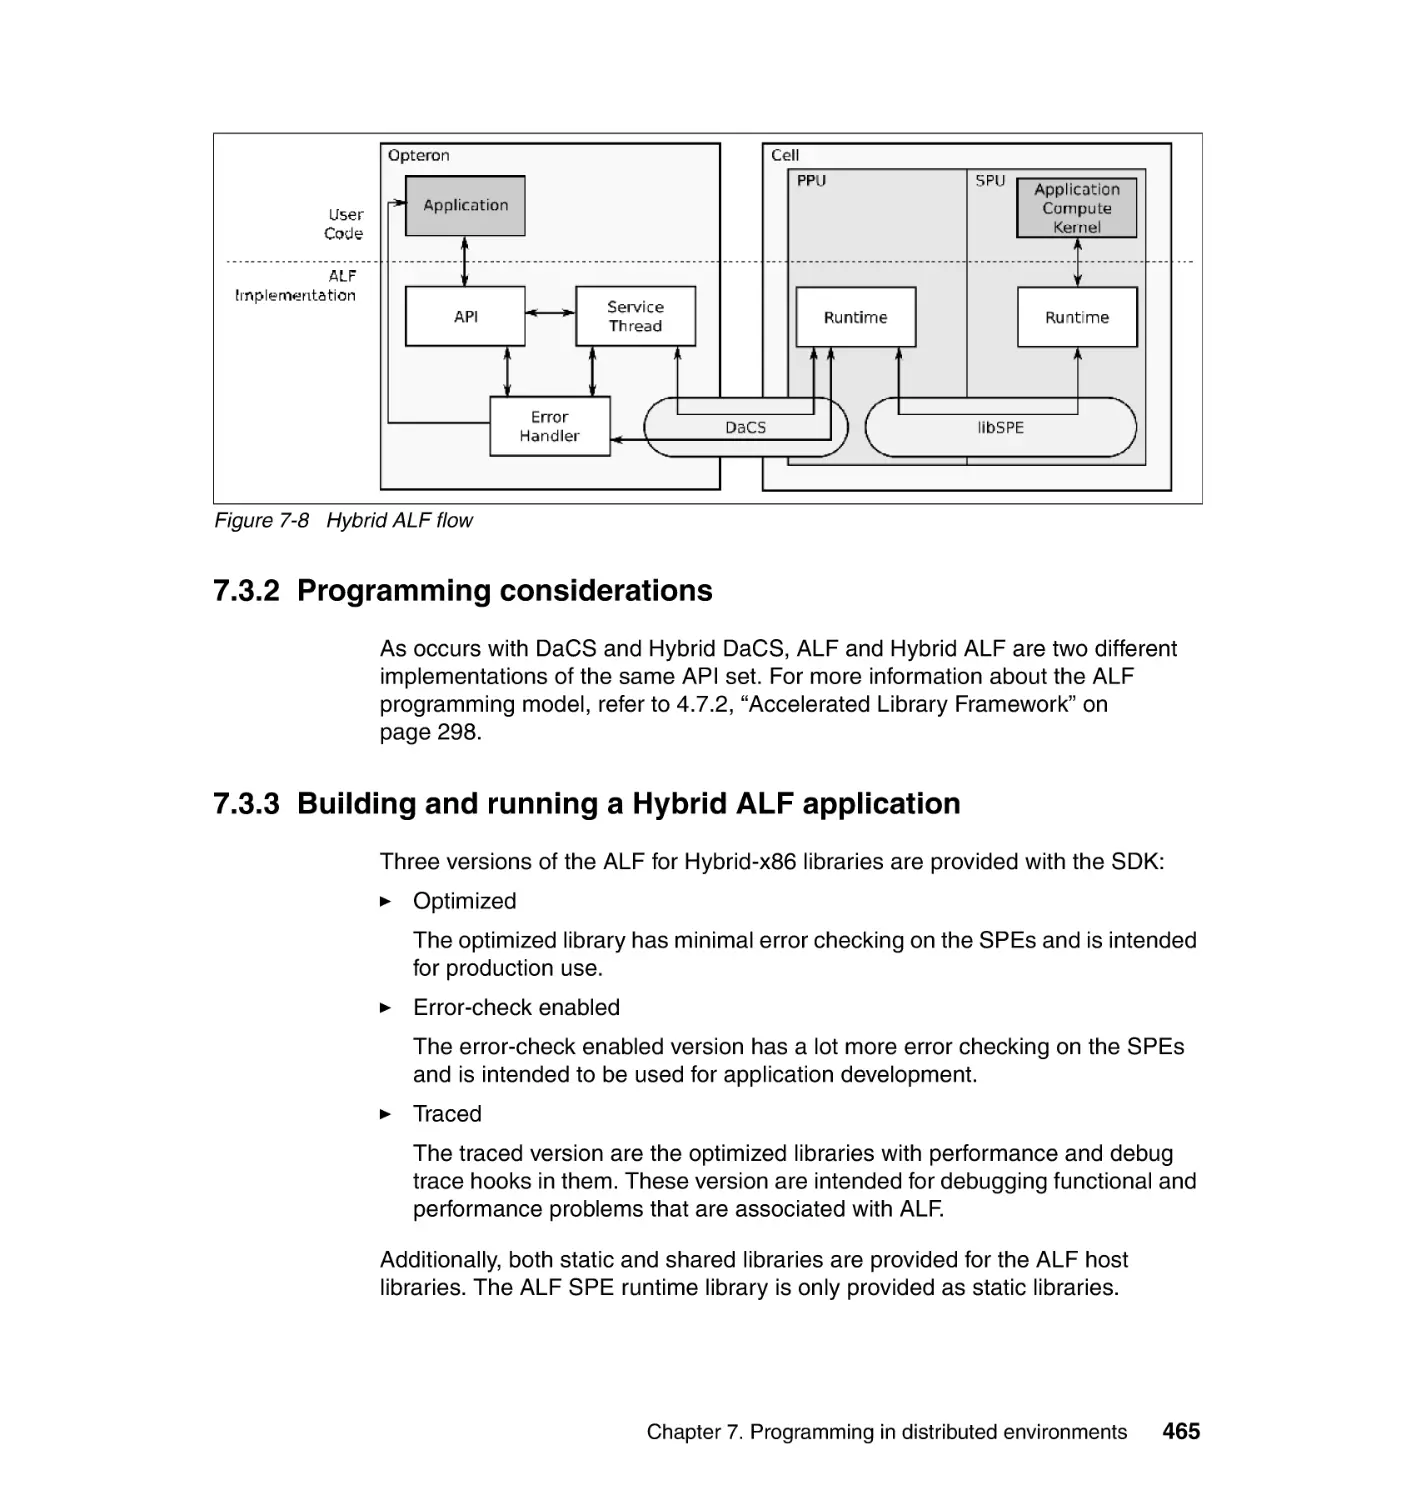 7.3.2 Programming considerations
7.3.3 Building and running a Hybrid ALF application